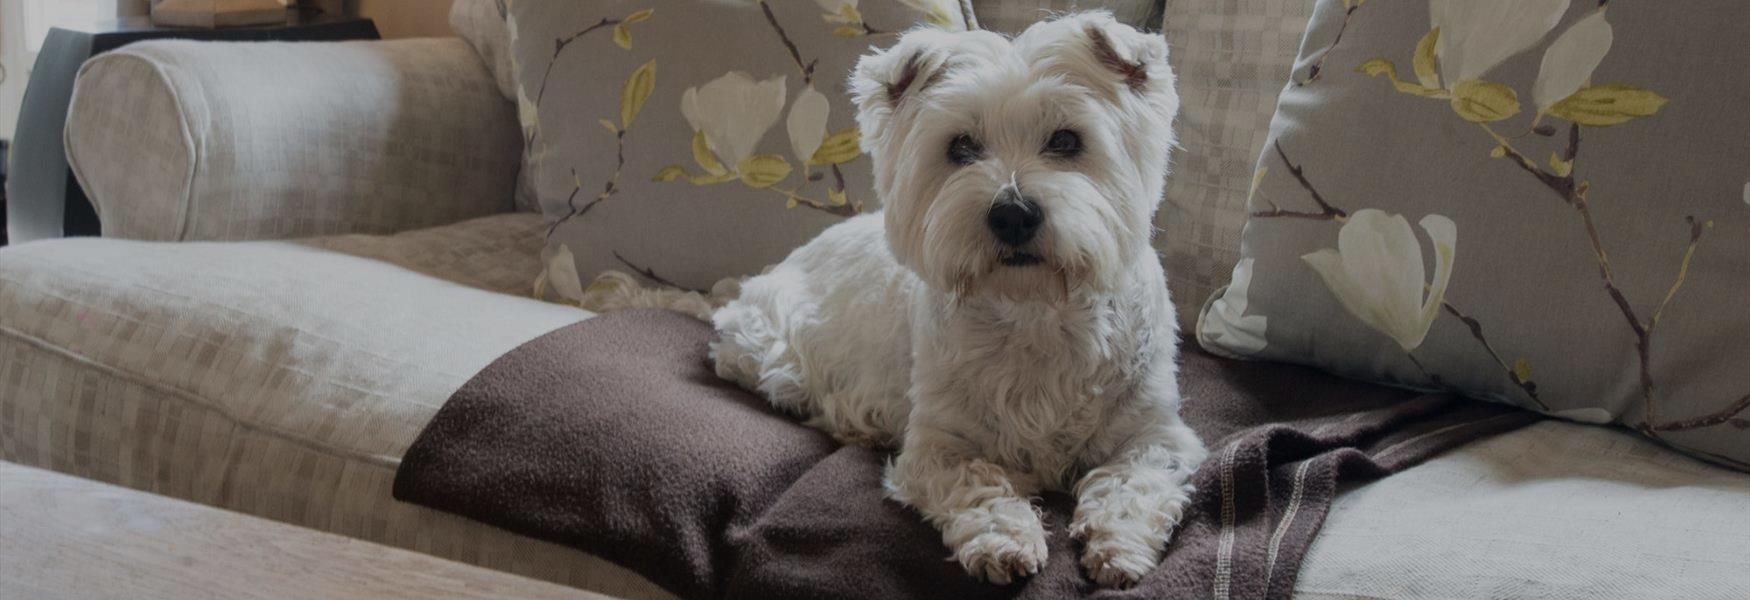 Dog Friendly Combermere Abbey Cottages